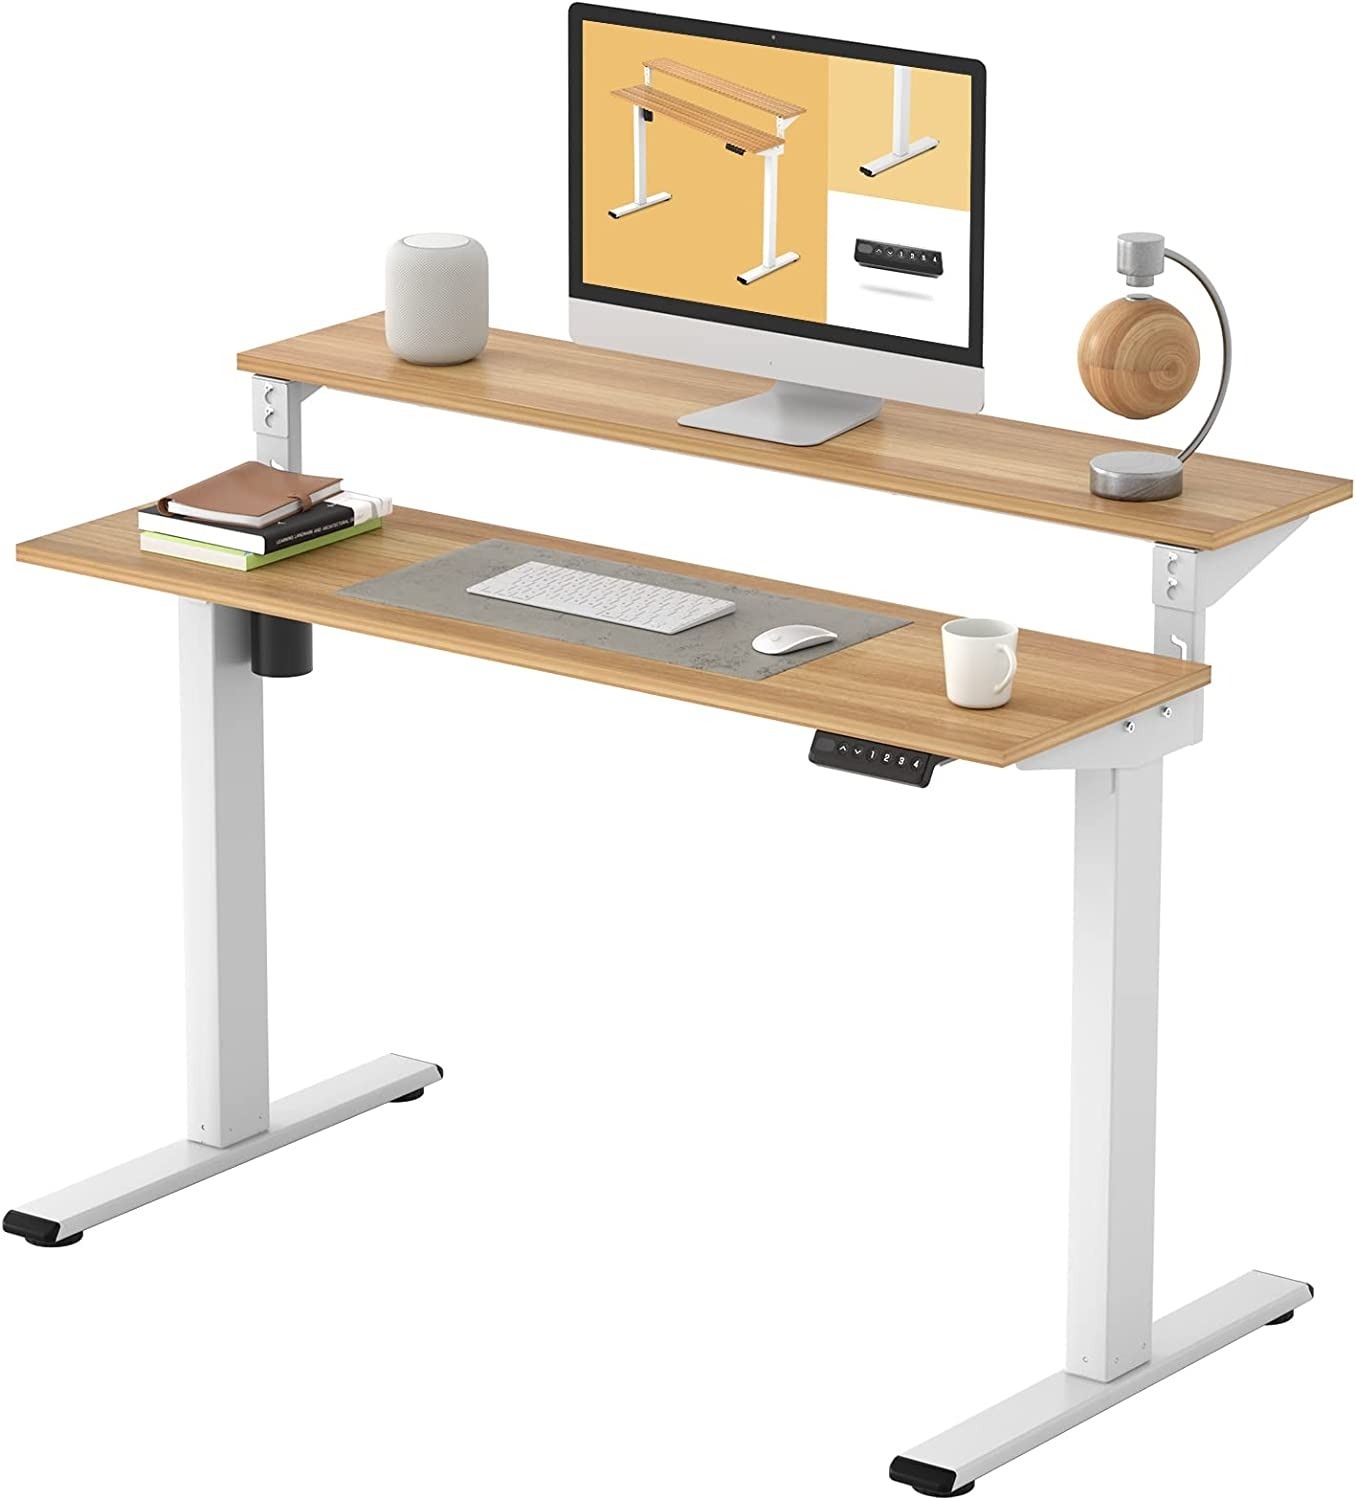 FLEXISPOT EF1 2-Tier Height Adjustable Electric Standing Desk (48" x 24") $138.80 + Free Shipping